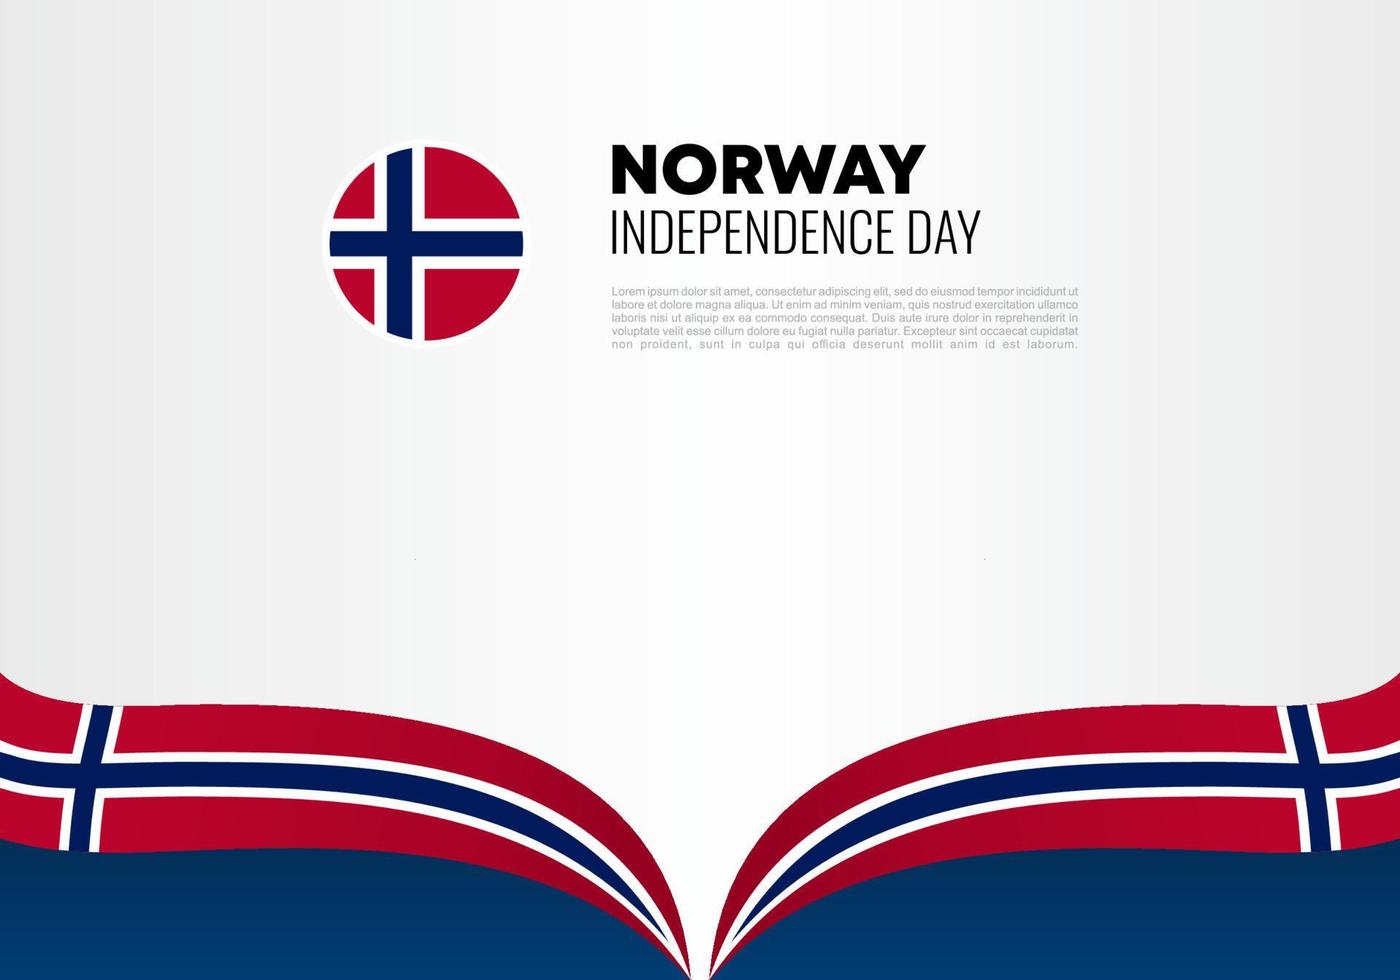 Norway Independence day background poster for national celebration vector